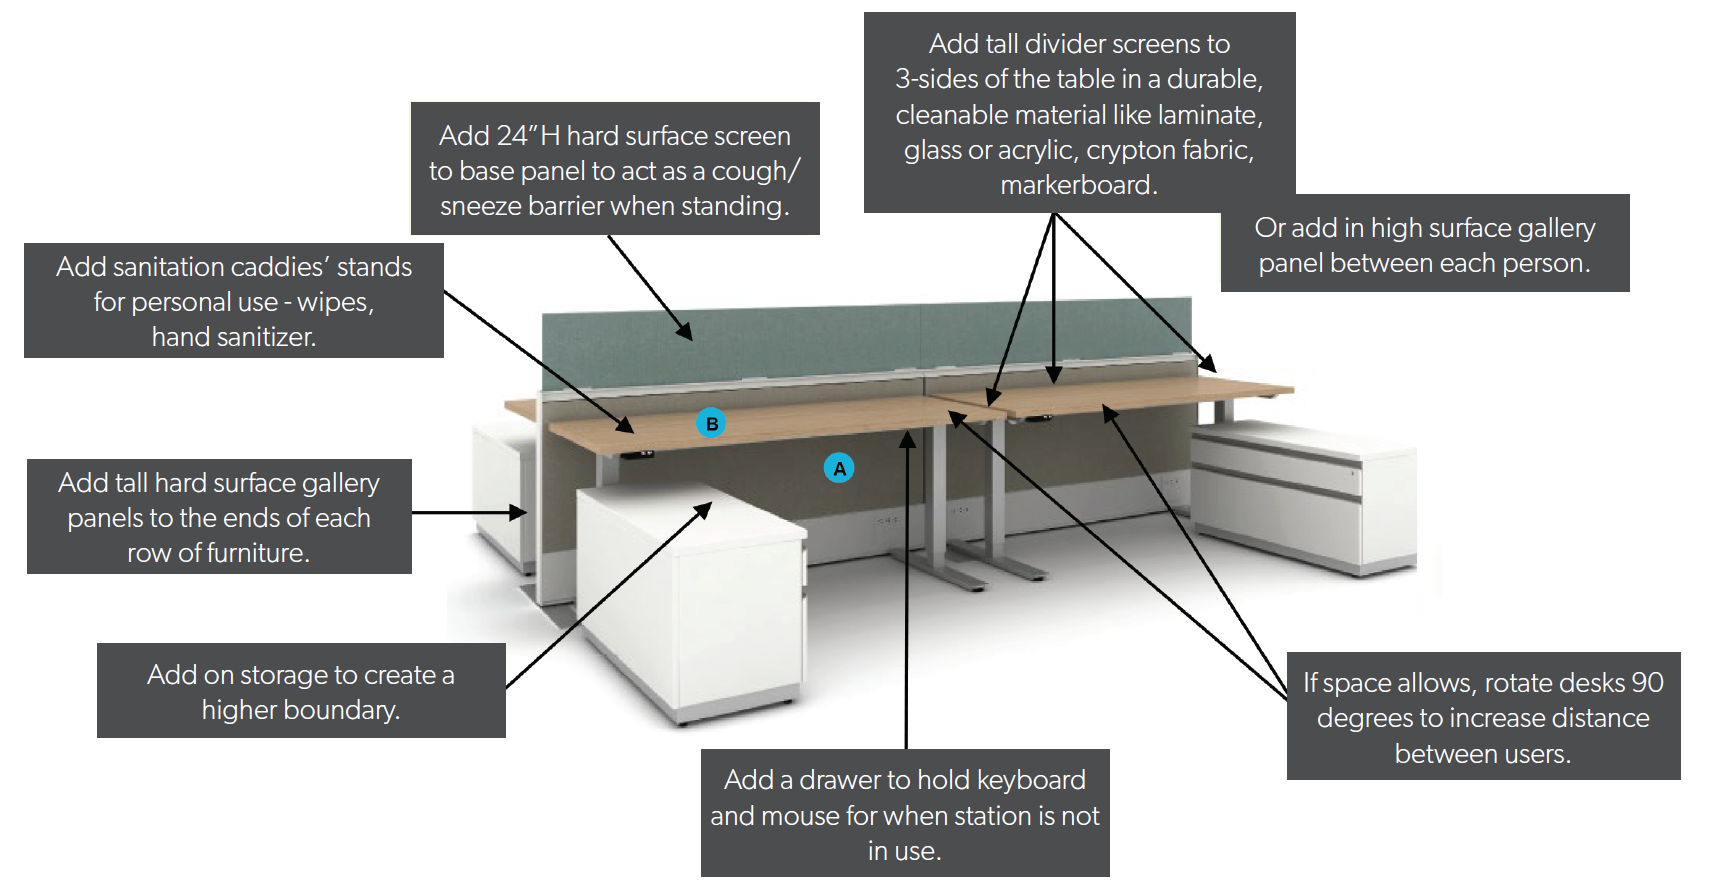 A) Freestanding panels or B) Freestanding height adjustable tables